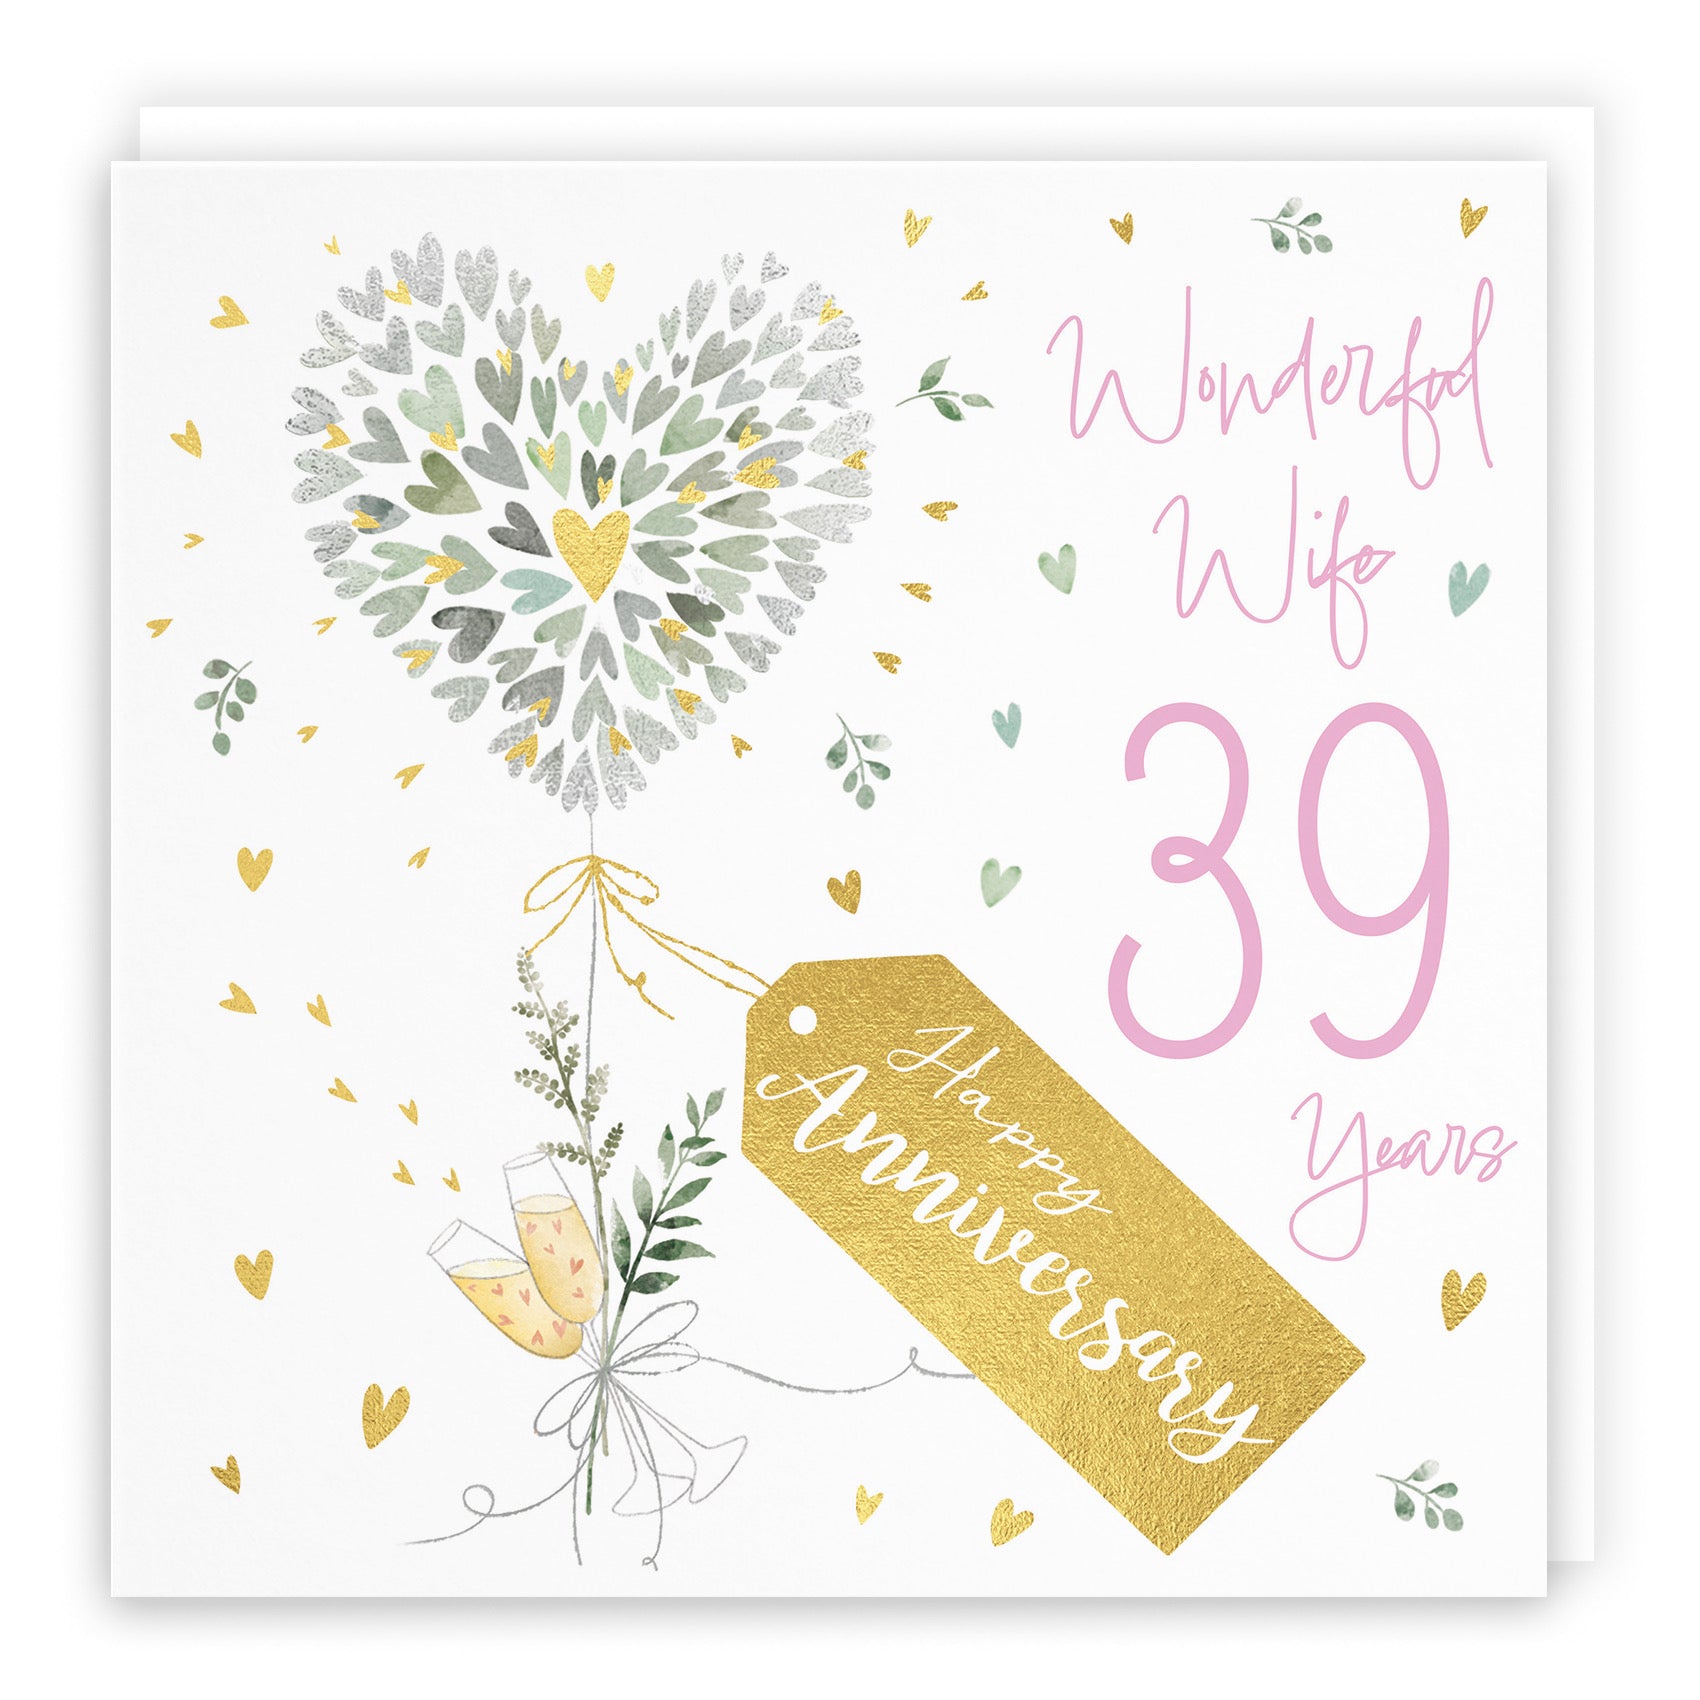 Wife 39th Anniversary Card Contemporary Hearts Milo's Gallery - Default Title (B0CKJ93G4M)